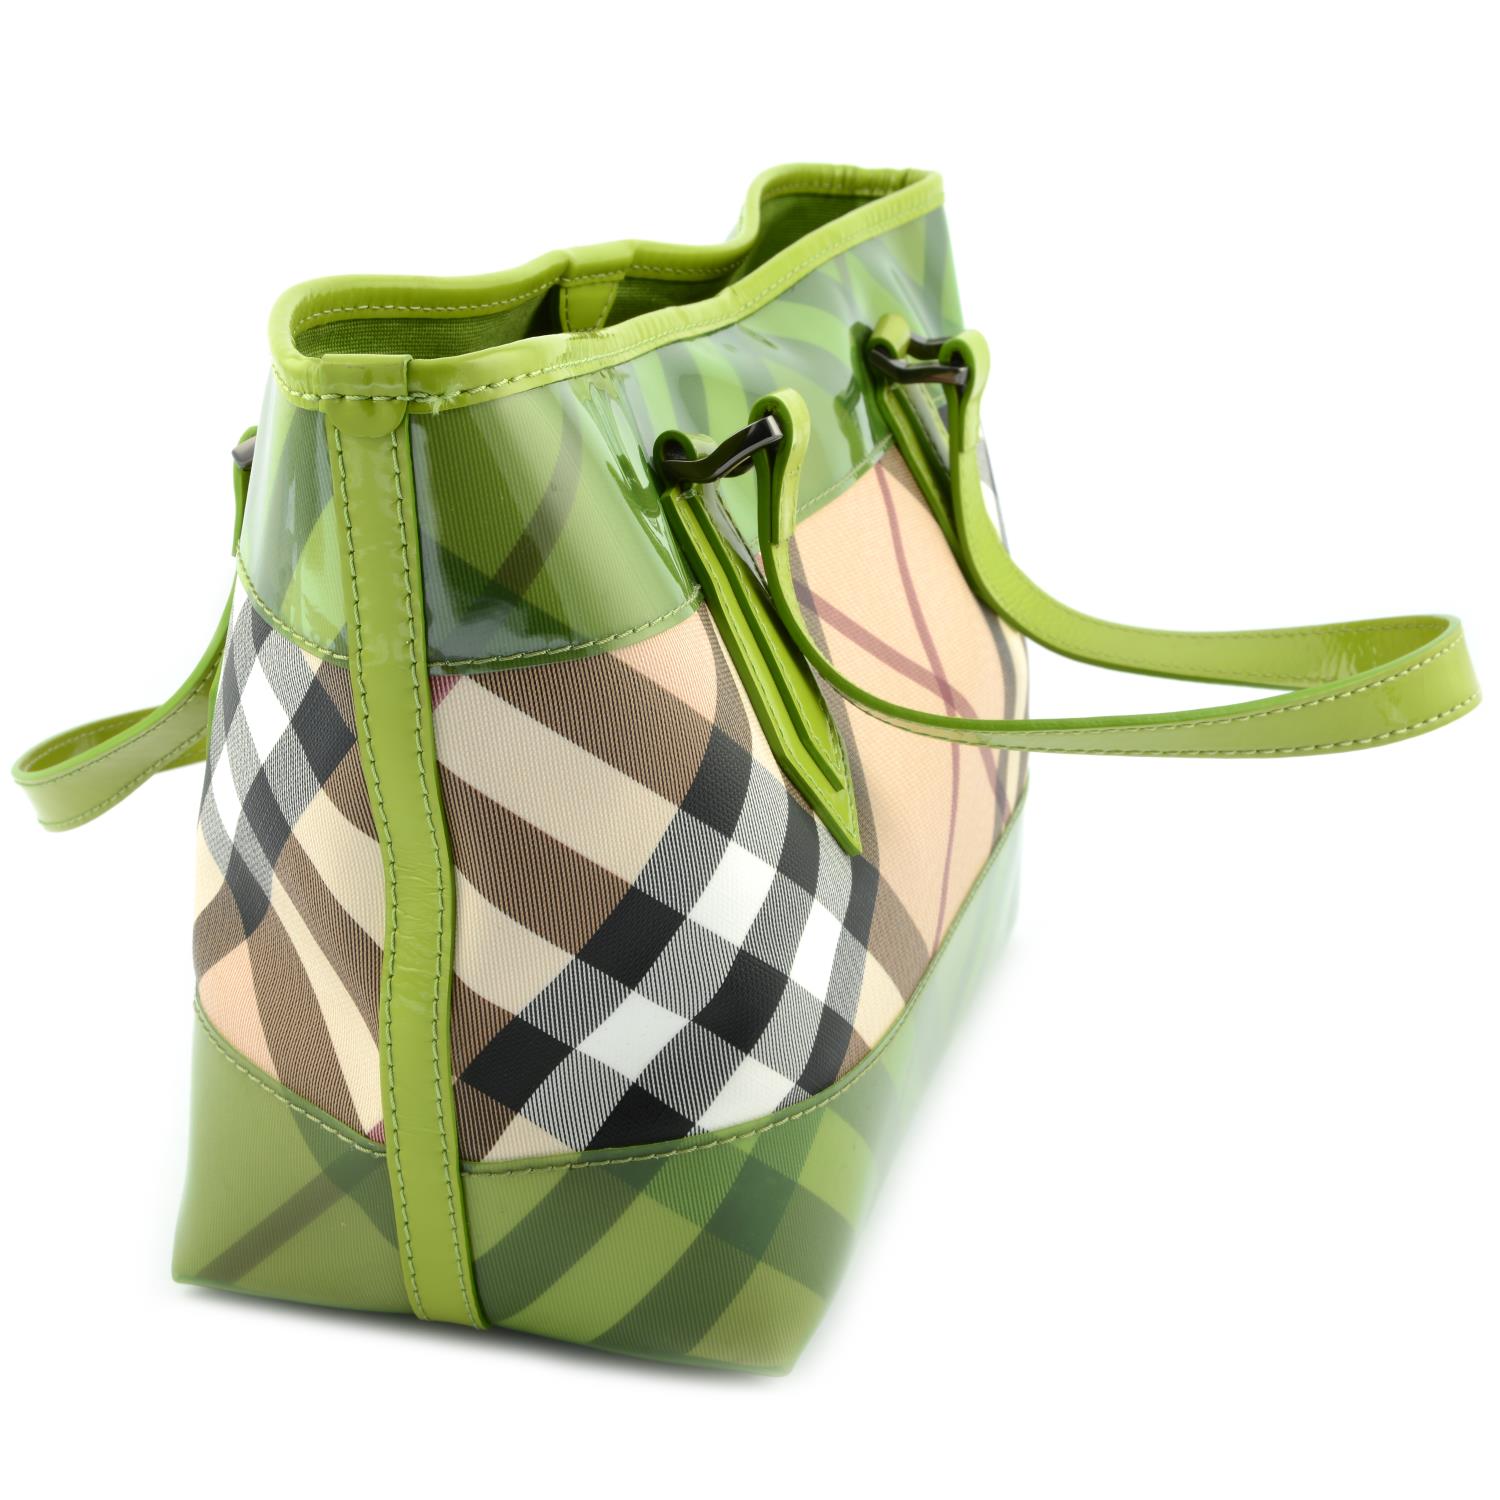 BURBERRY - a coated canvas shopping tote. - Image 3 of 5